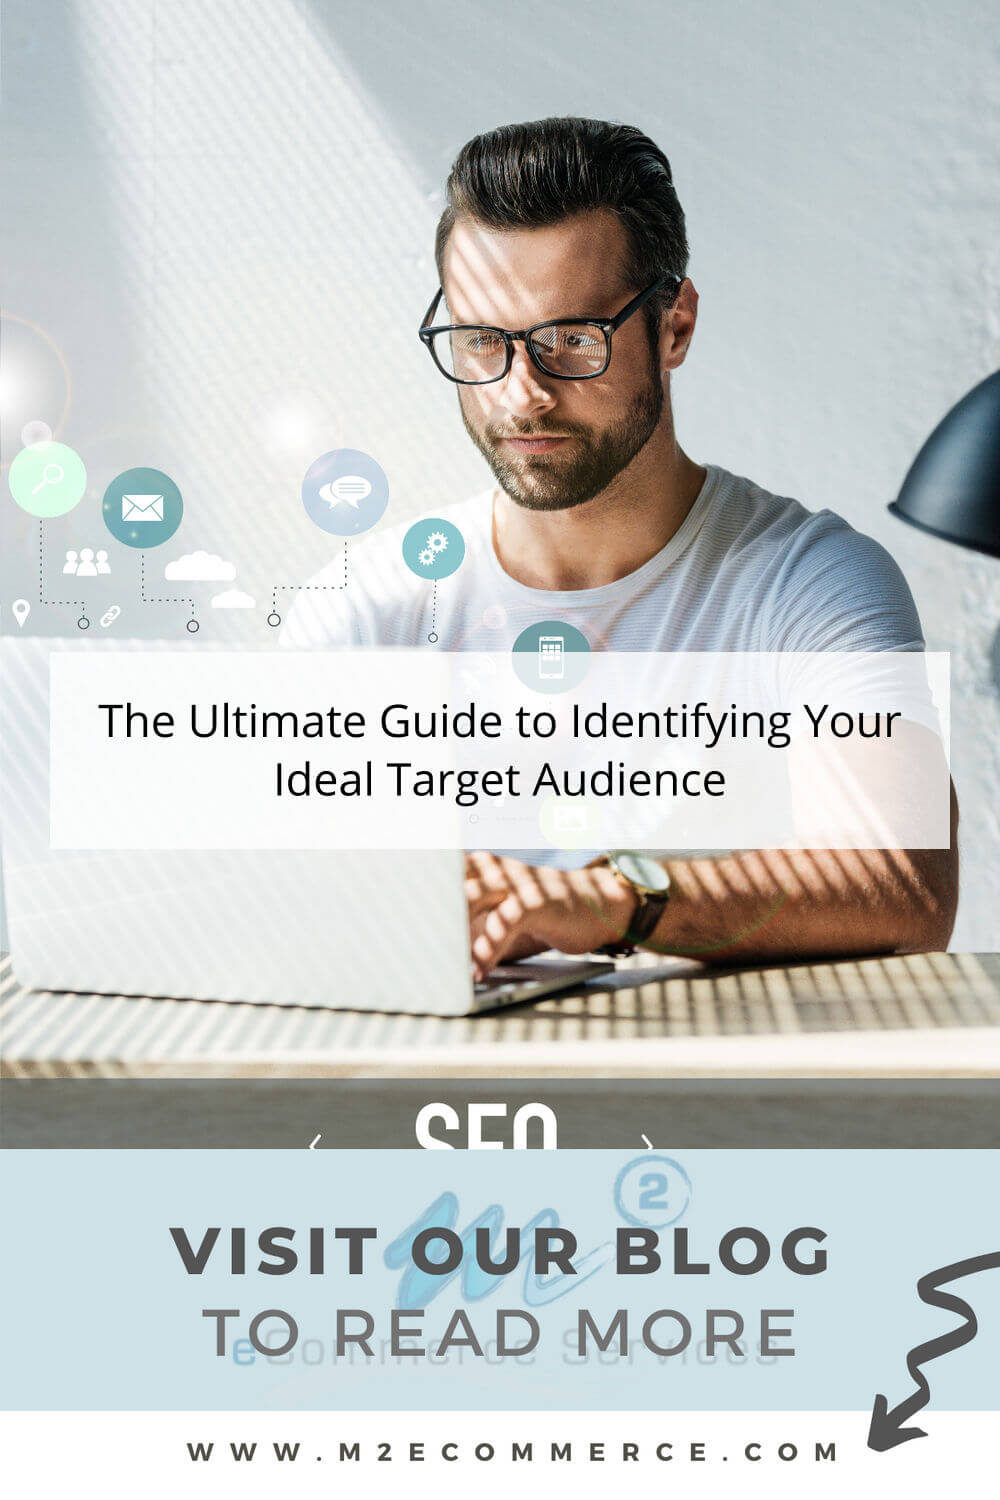 The Ultimate Guide to Identifying Your Ideal Target Audience